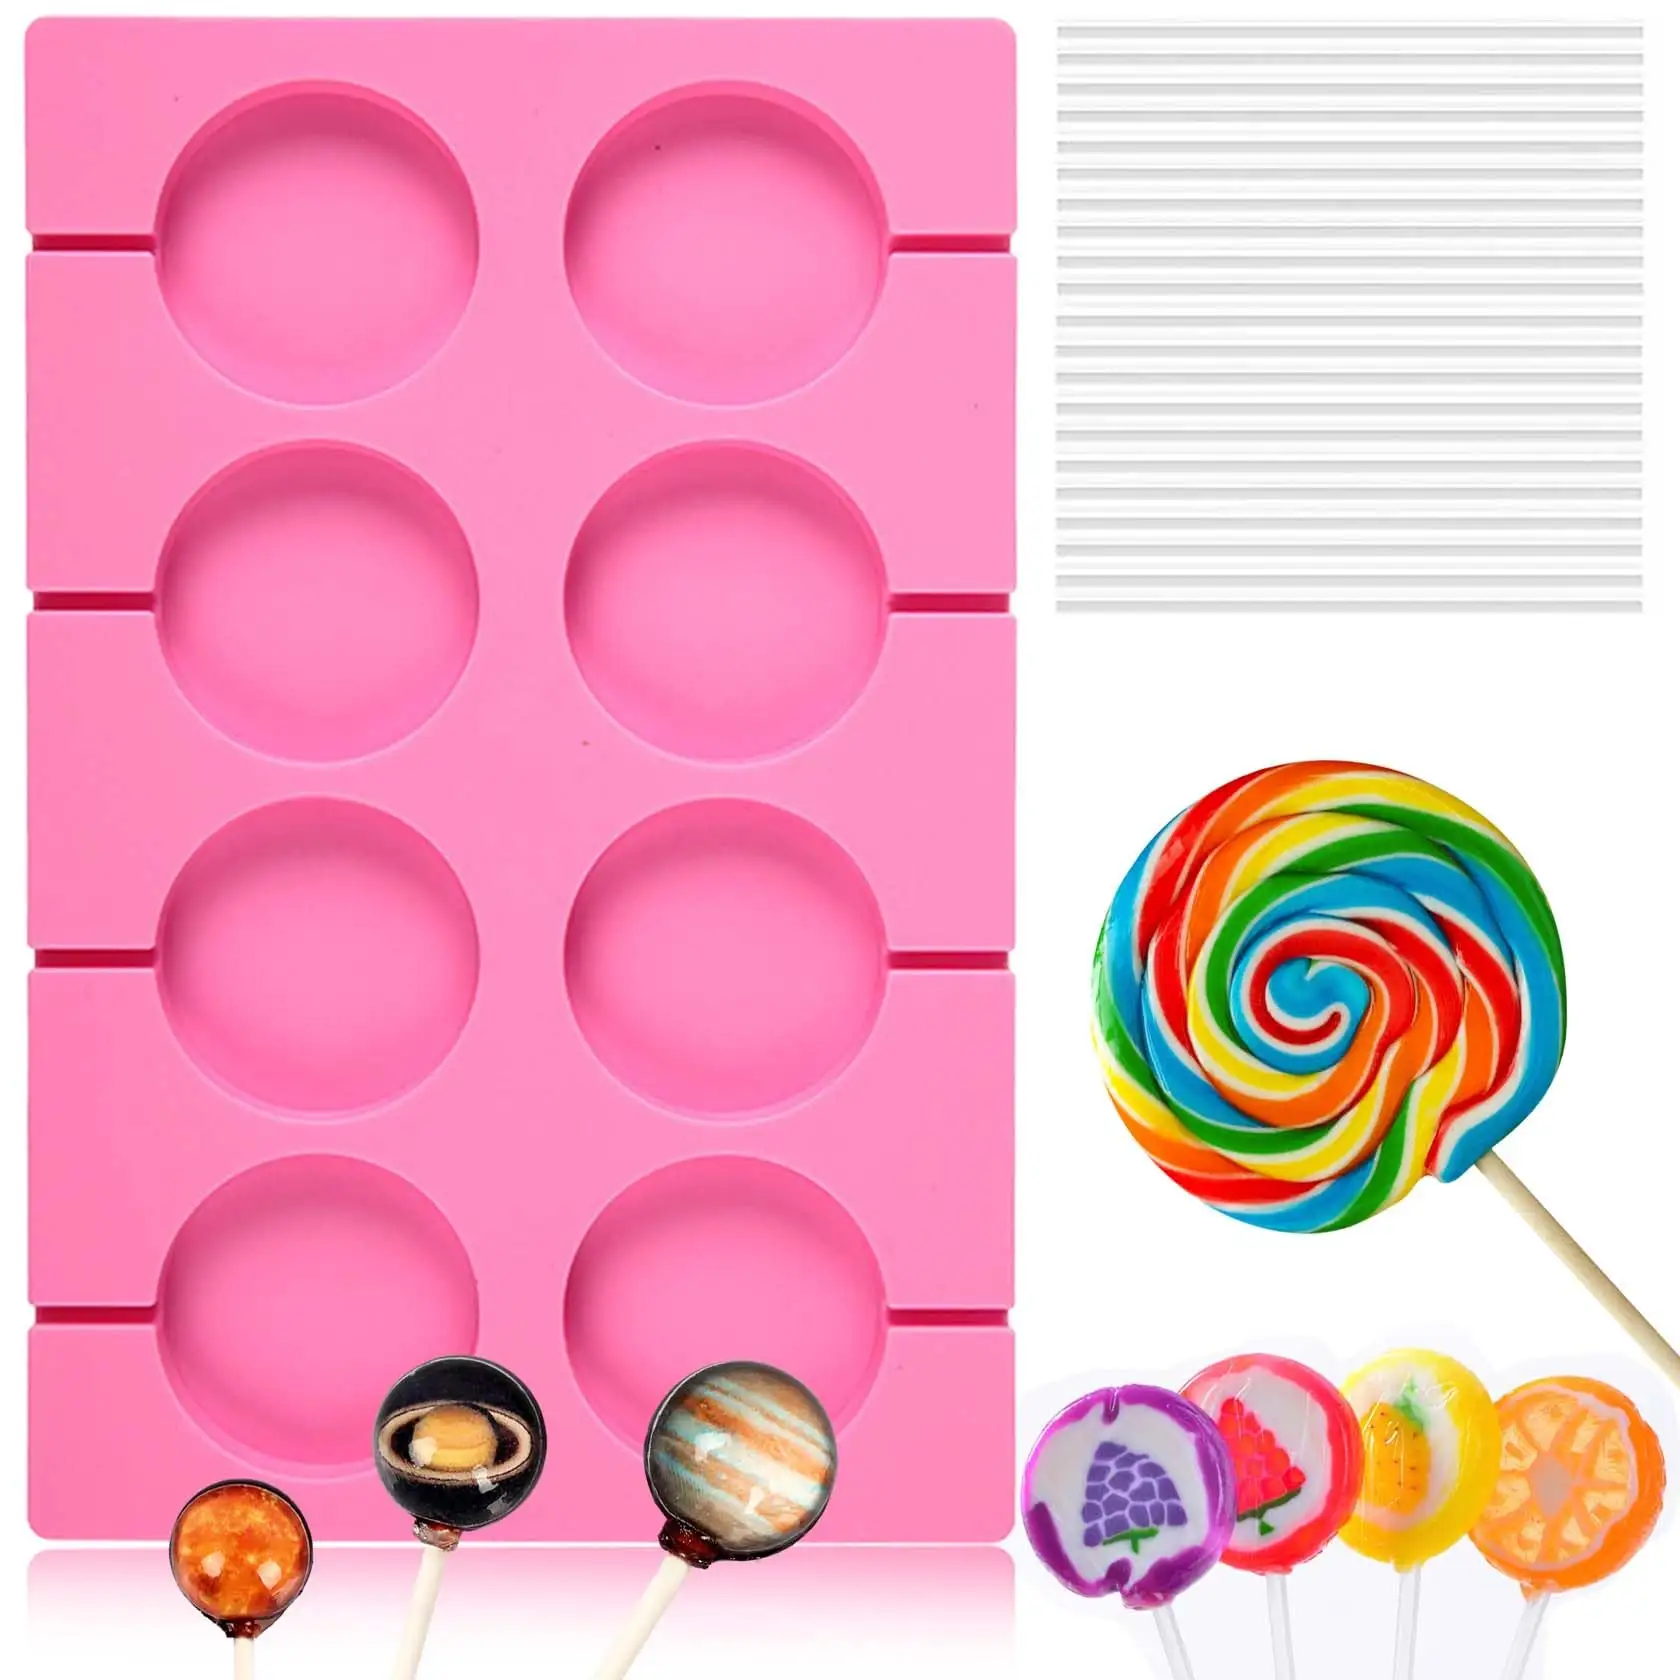 BPA Free Non-stick Hard Candy Mold Silicone Round Lollipop Candy Molds Chocolate Cake Decorating Pastry Mould